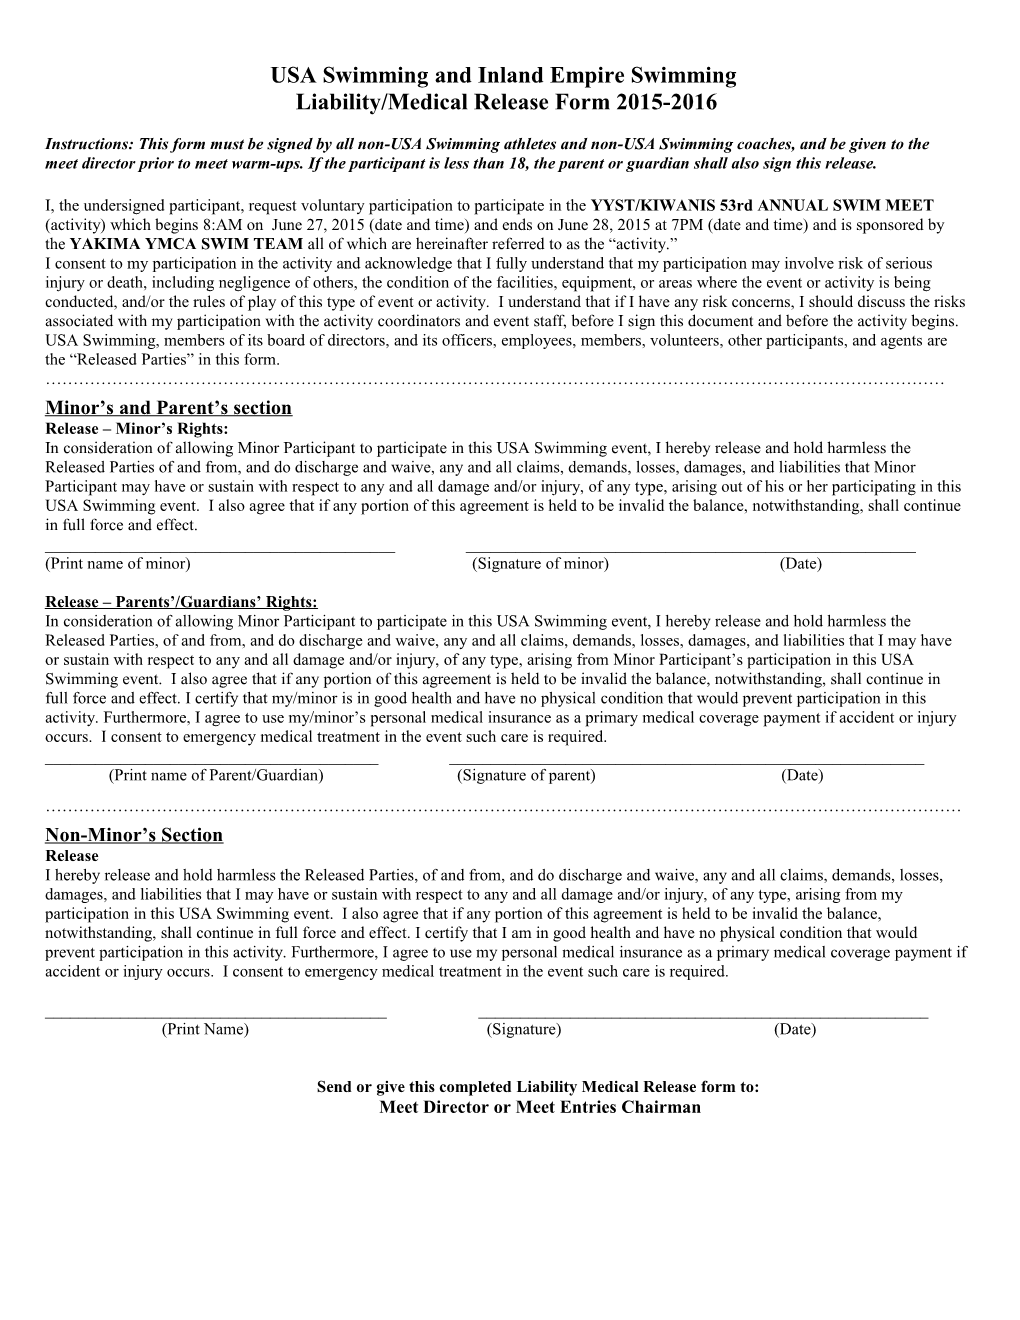 USA Swimming and Inland Empire Swimming Liability/Medical Release Form 2015-2016